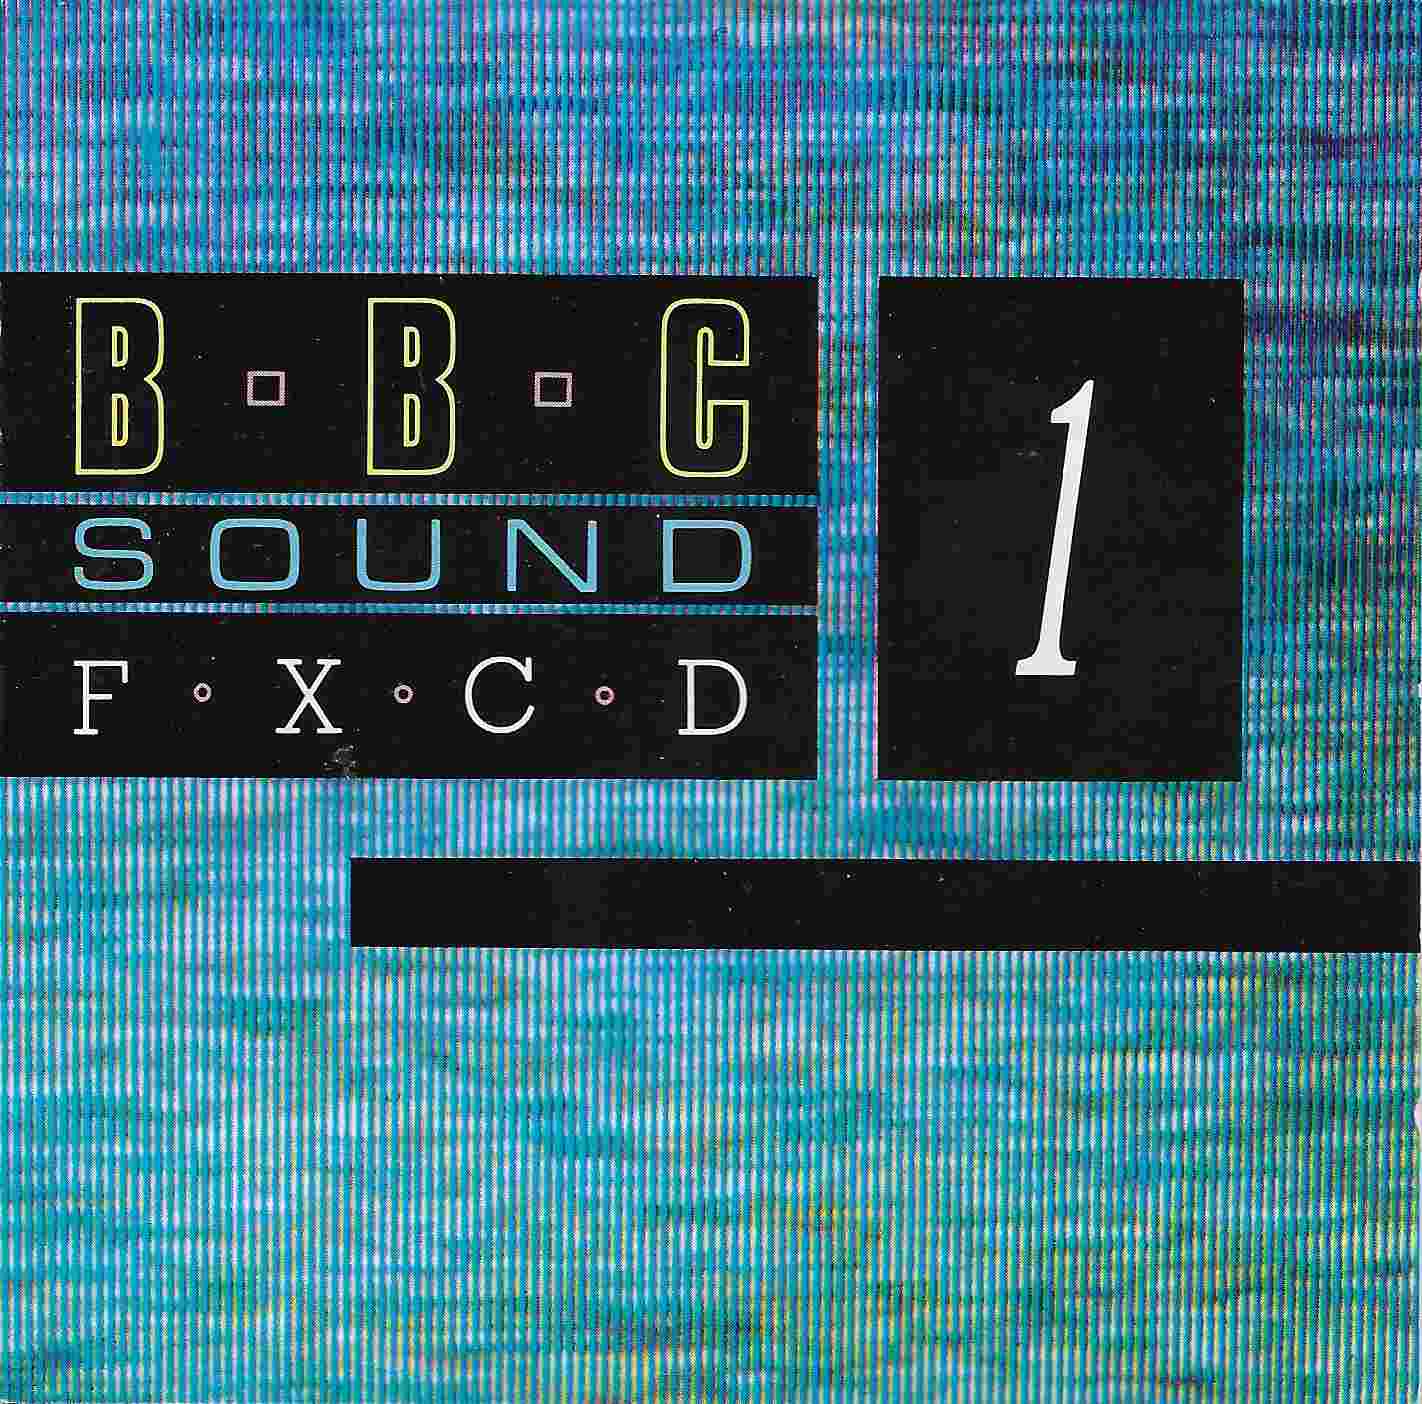 Picture of BBCCD SFX001 BBC sound effects by artist Various from the BBC cds - Records and Tapes library